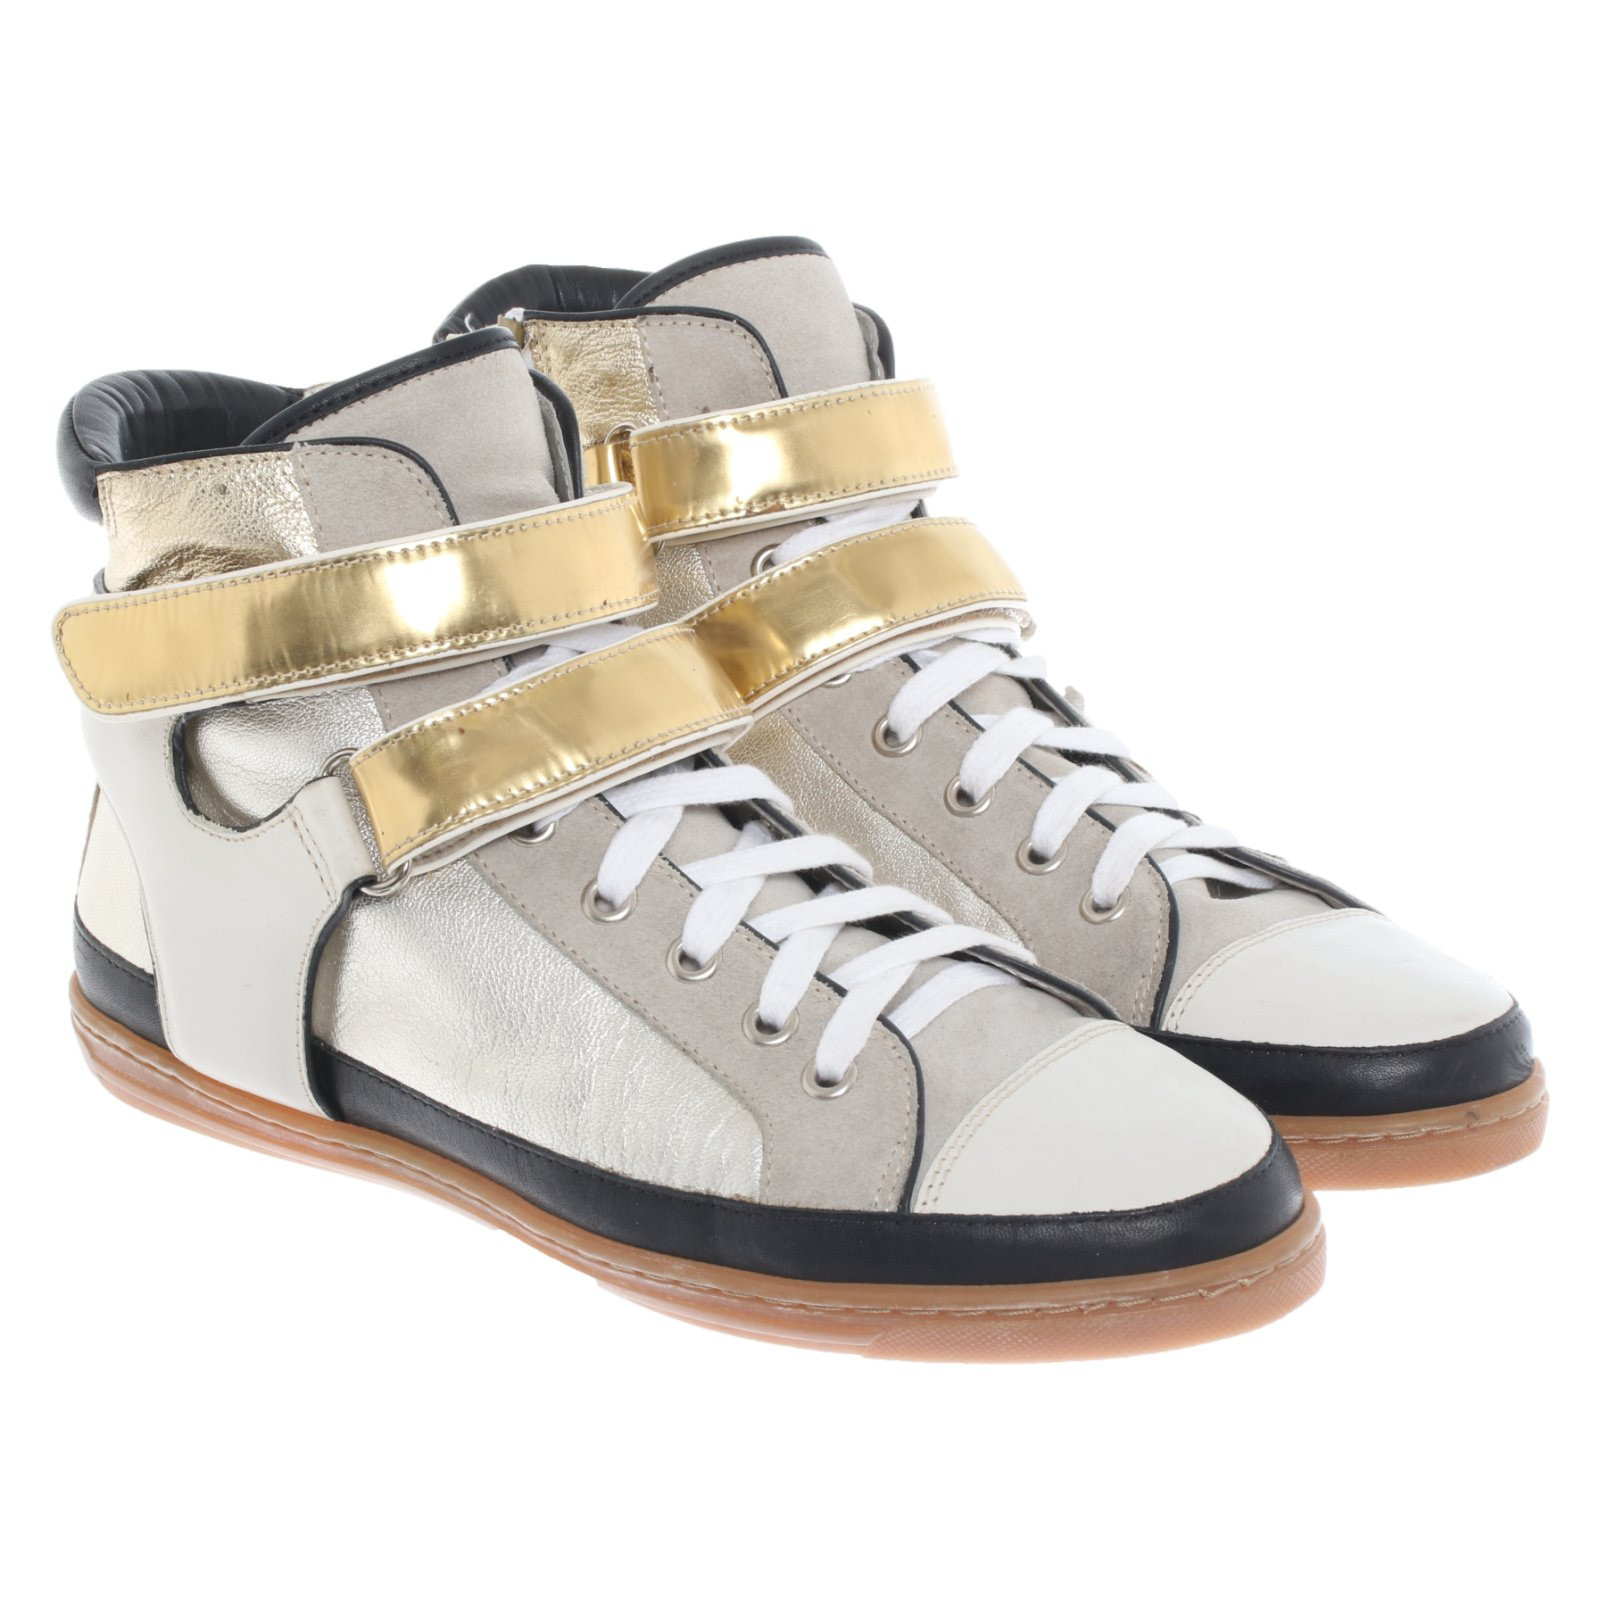 Maje Trainers Leather - Second Hand Maje Trainers Leather buy used for 69€  (4750862)